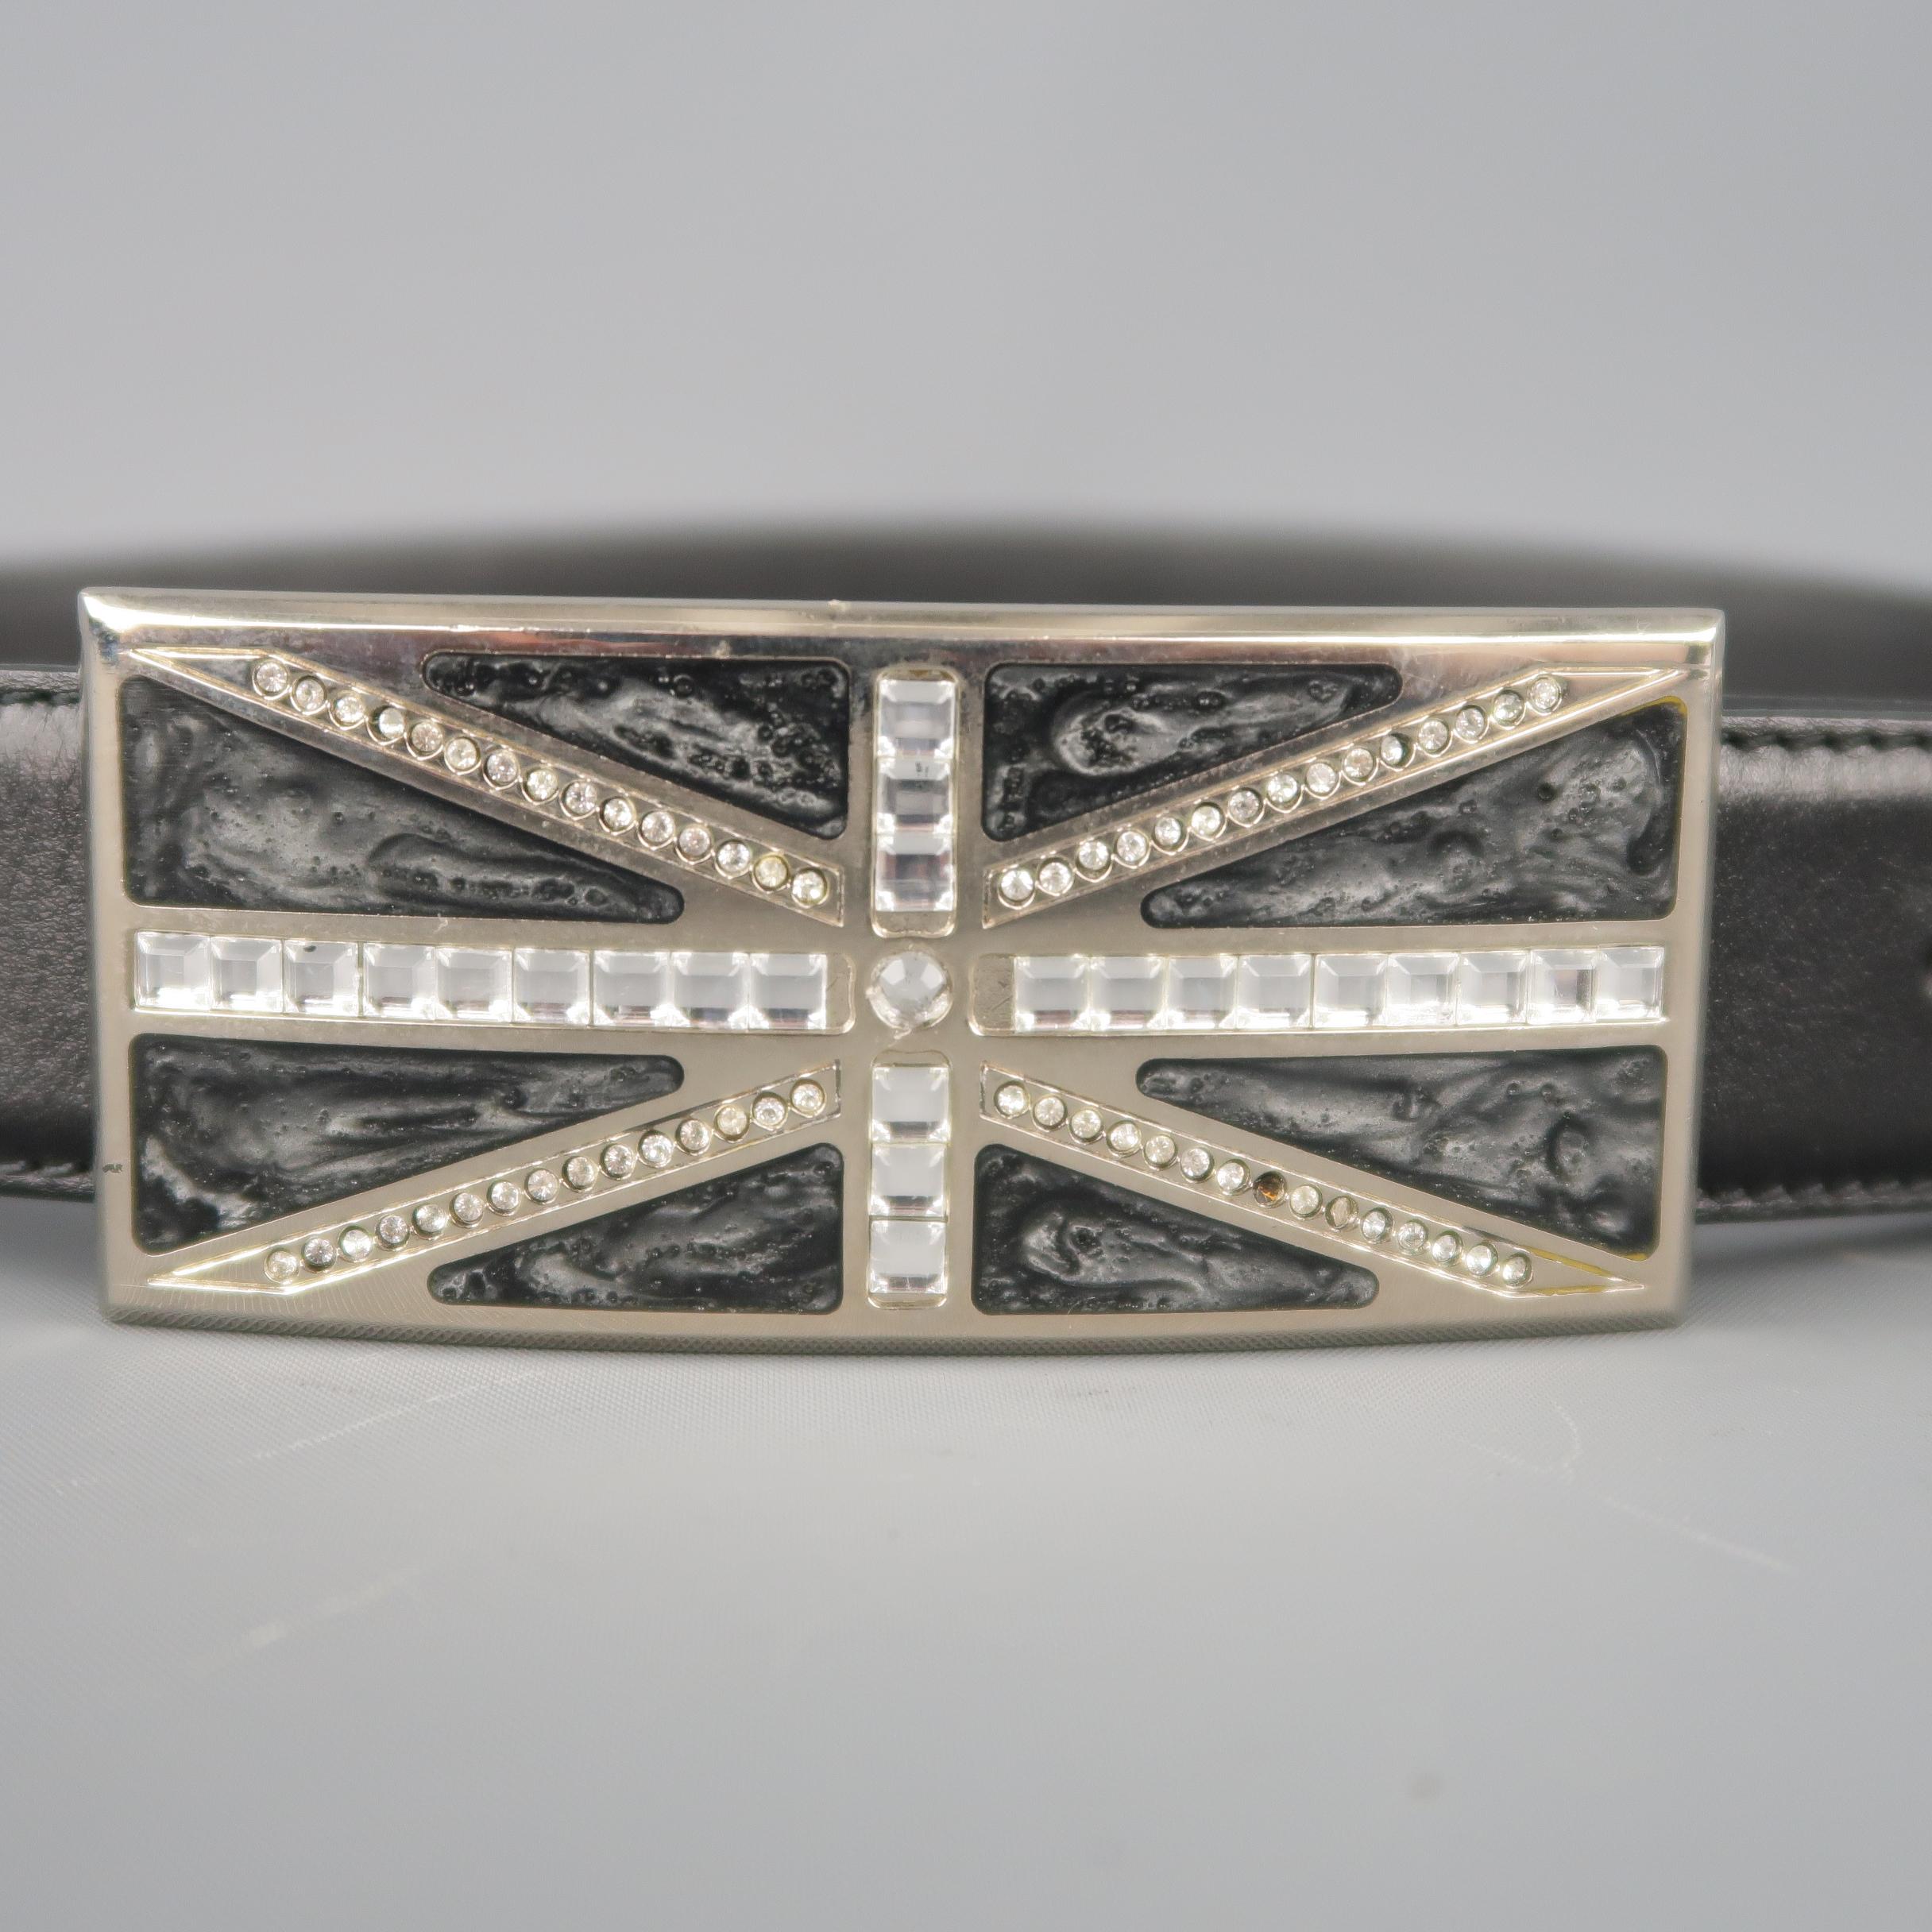 Vintage GIANNI VERSACE belt features a black leather strap and silver tone marbled enamel Union Jack buckle with rhinestones. Missing a stone on buckle and wear on strap. As-is. Made in Italy.
 
Pre-Owned Condition.
Marked: 70 / 28
 
Length: 31